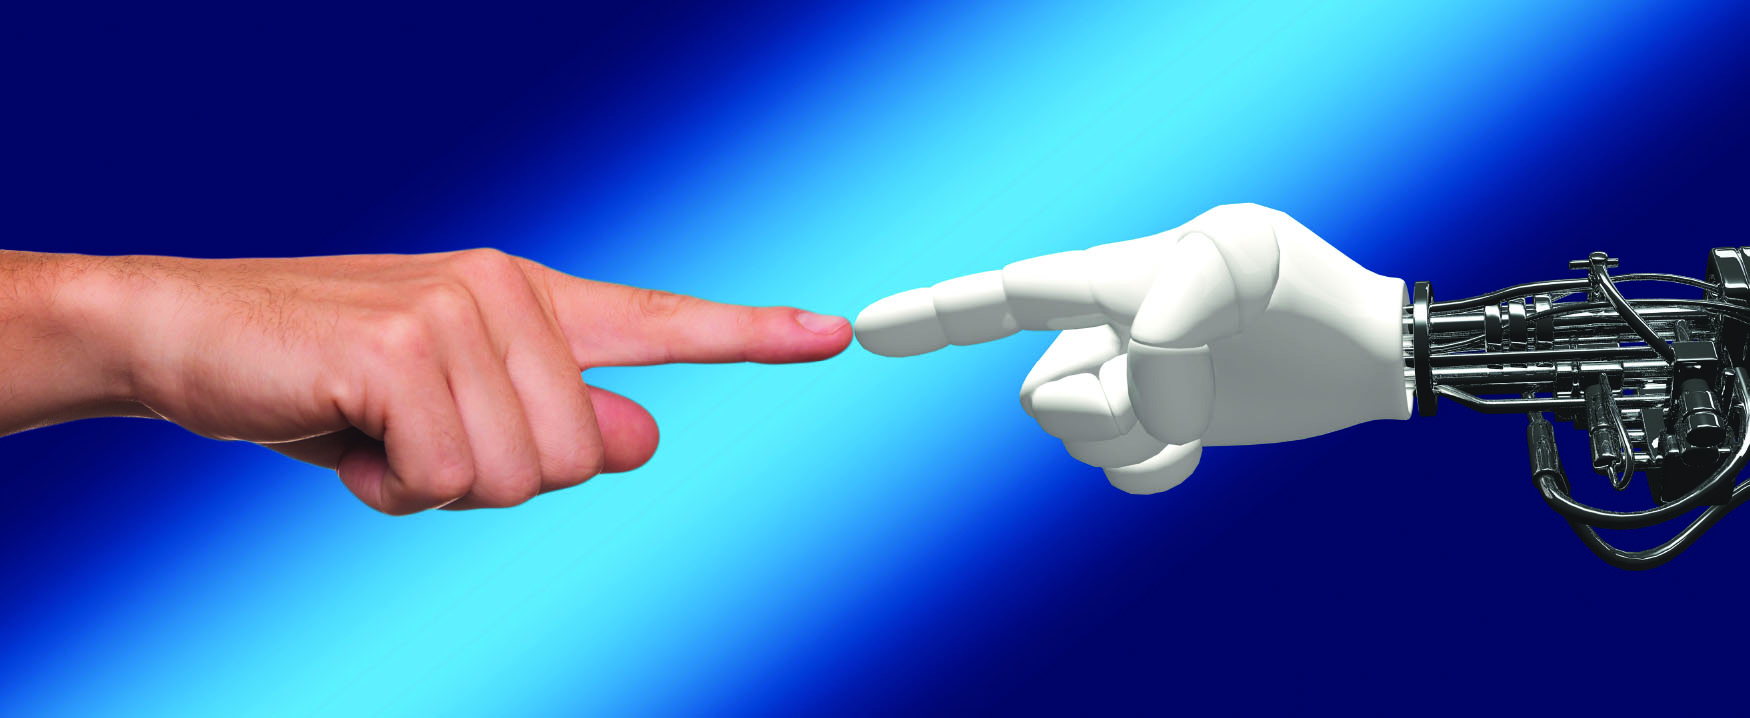 This image shows a human hand on the left and a robot hand on the right. Their index fingers are touching in the middle.